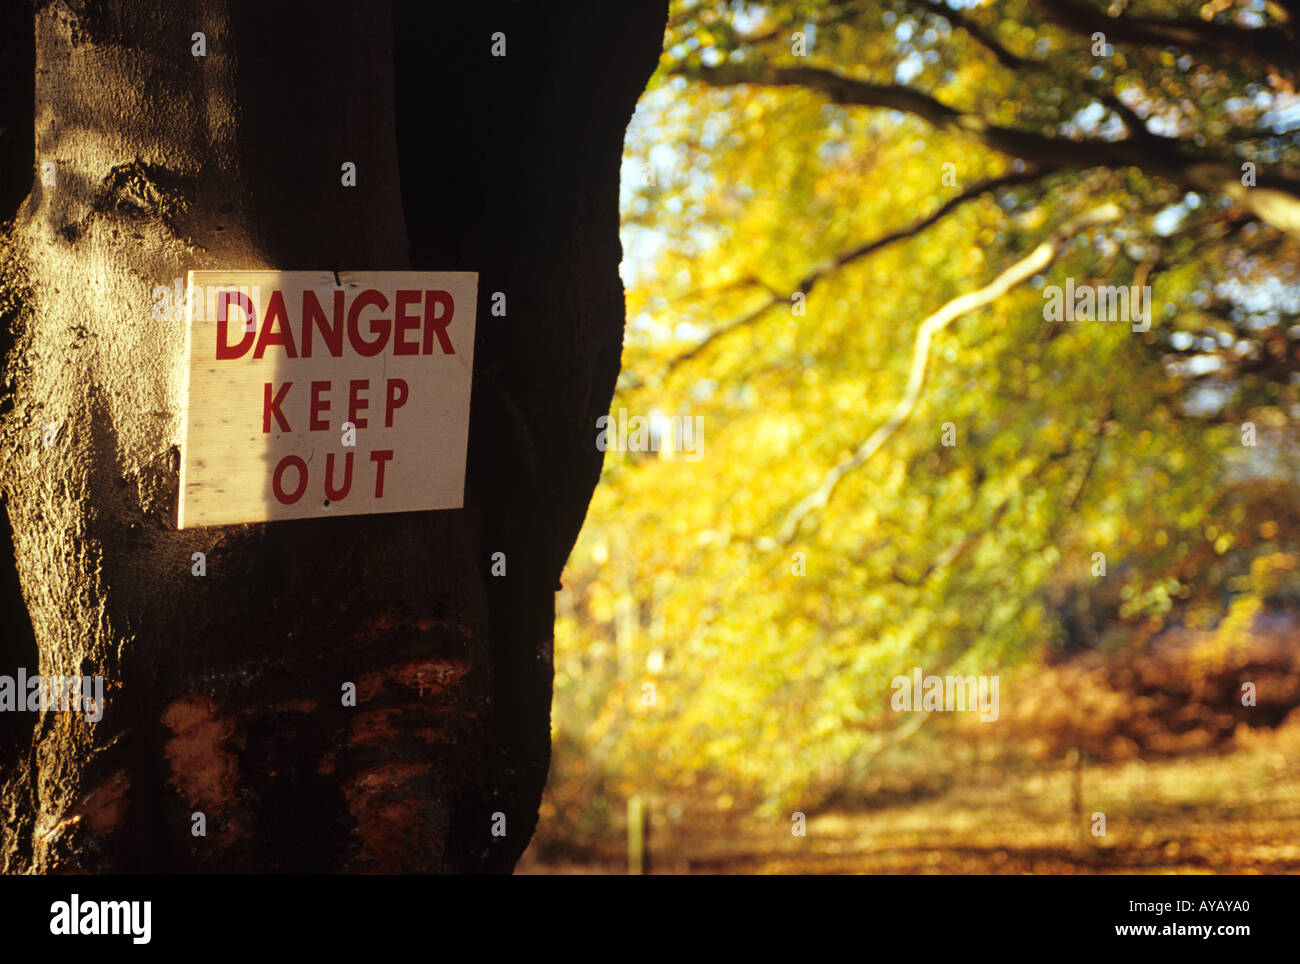 Danger Sign Keep Out Of Woods. Stock Photo